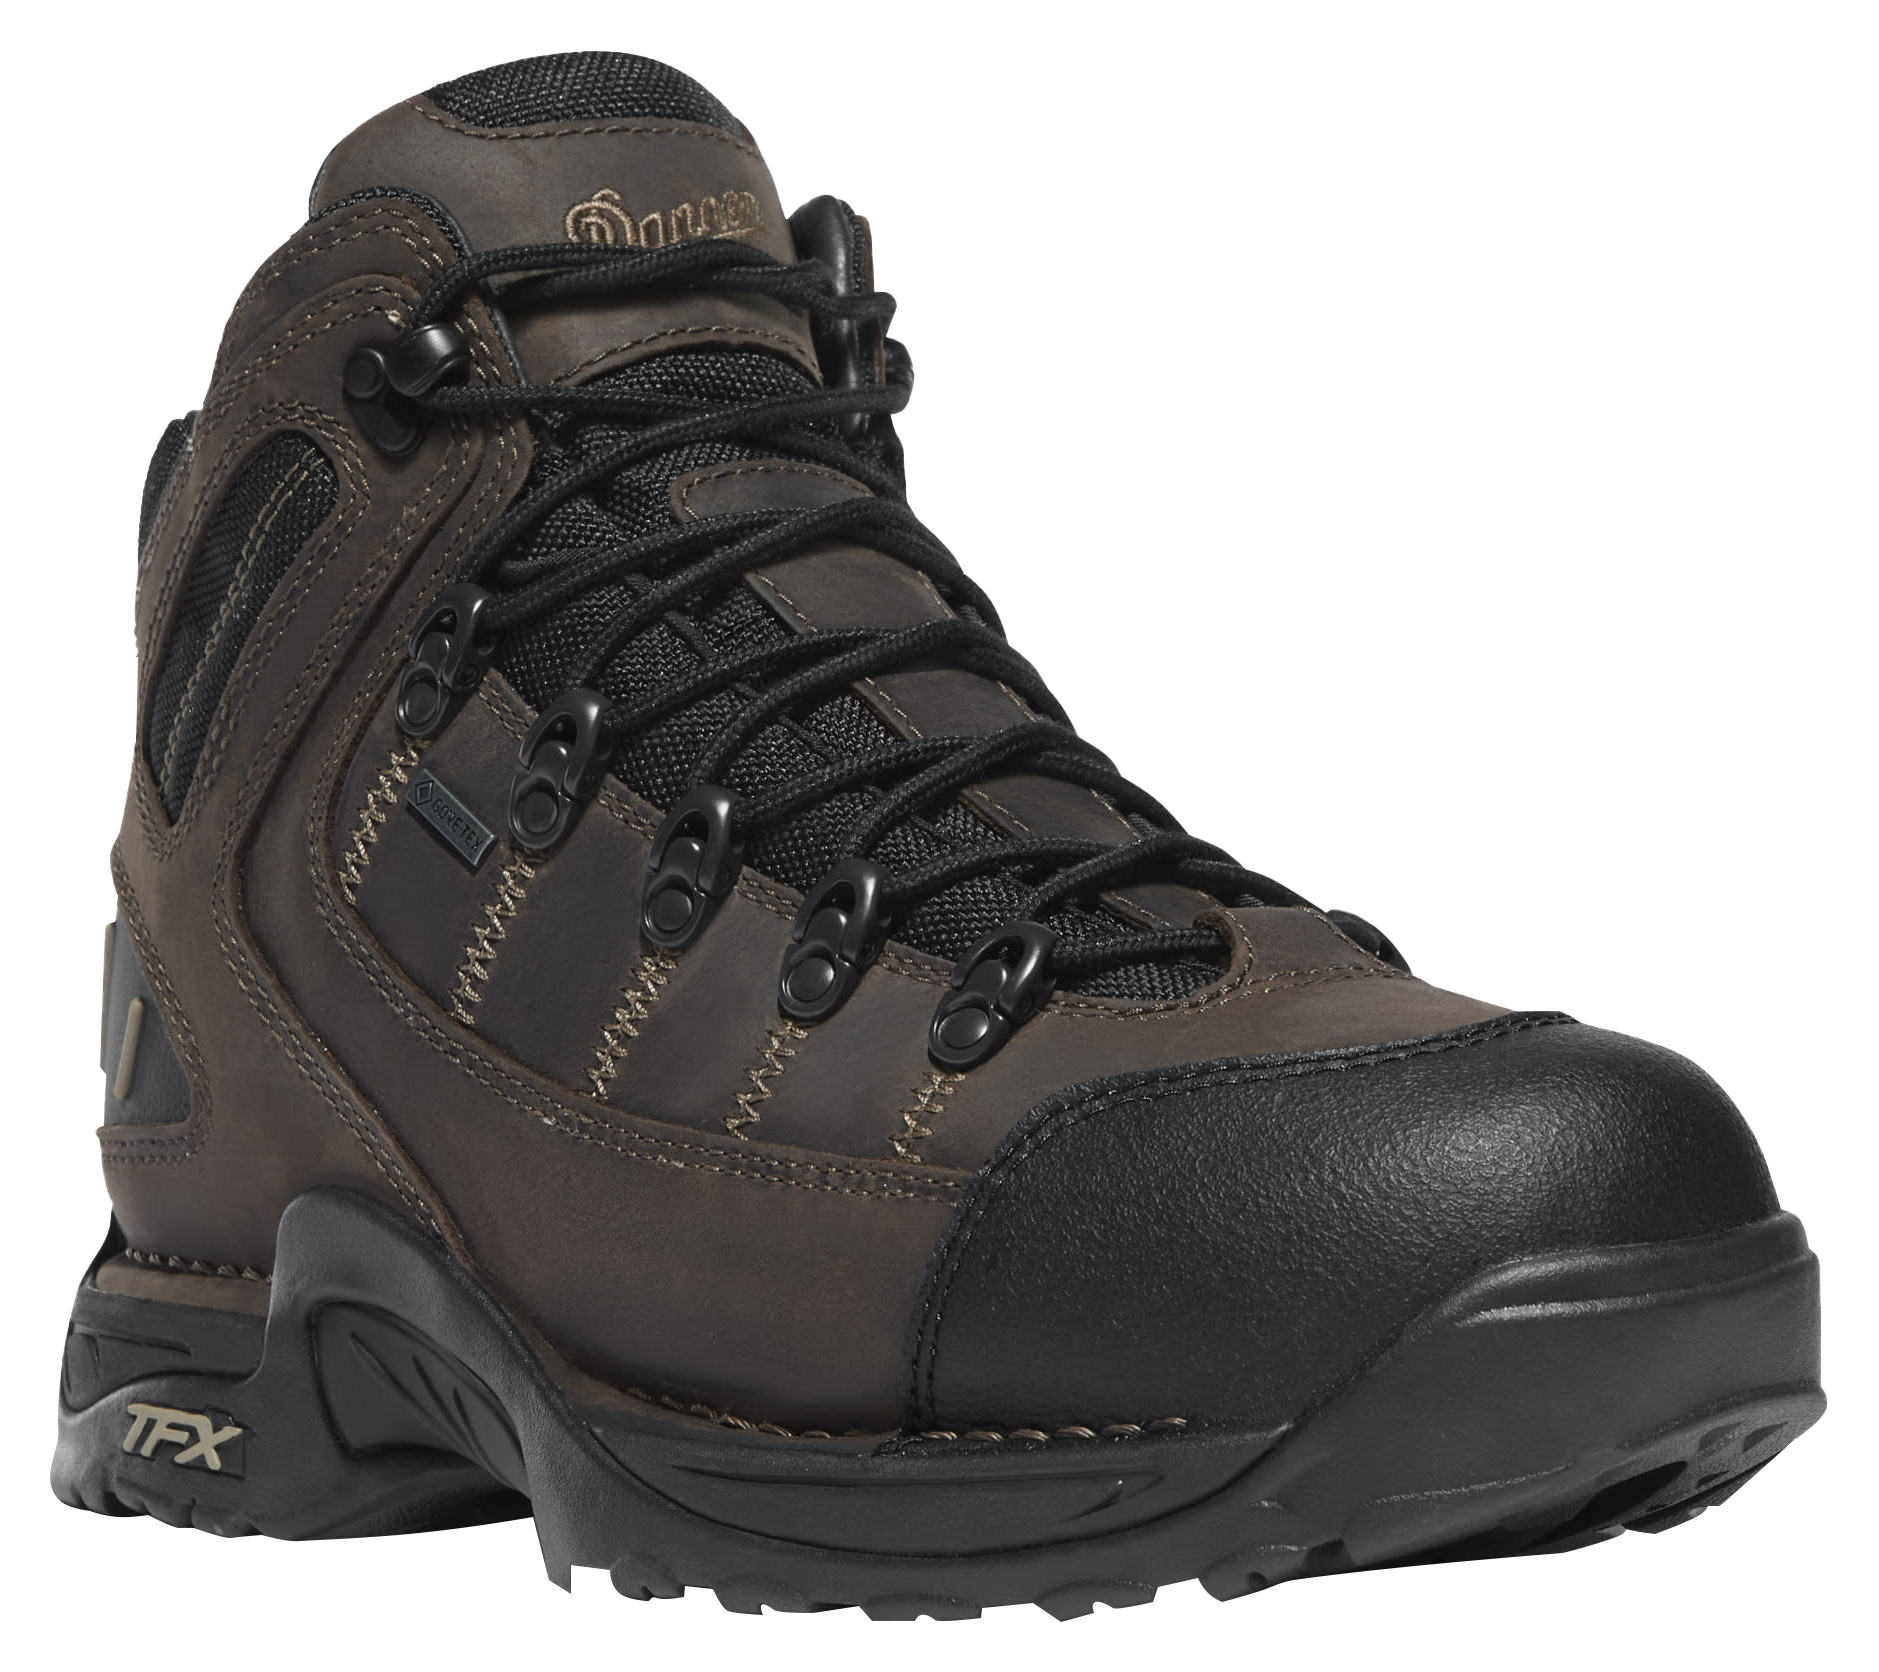 Danner 453 GORE-TEX Waterproof Hiking Boots for Men - Loam Brown/Chocolate Chip - 8W